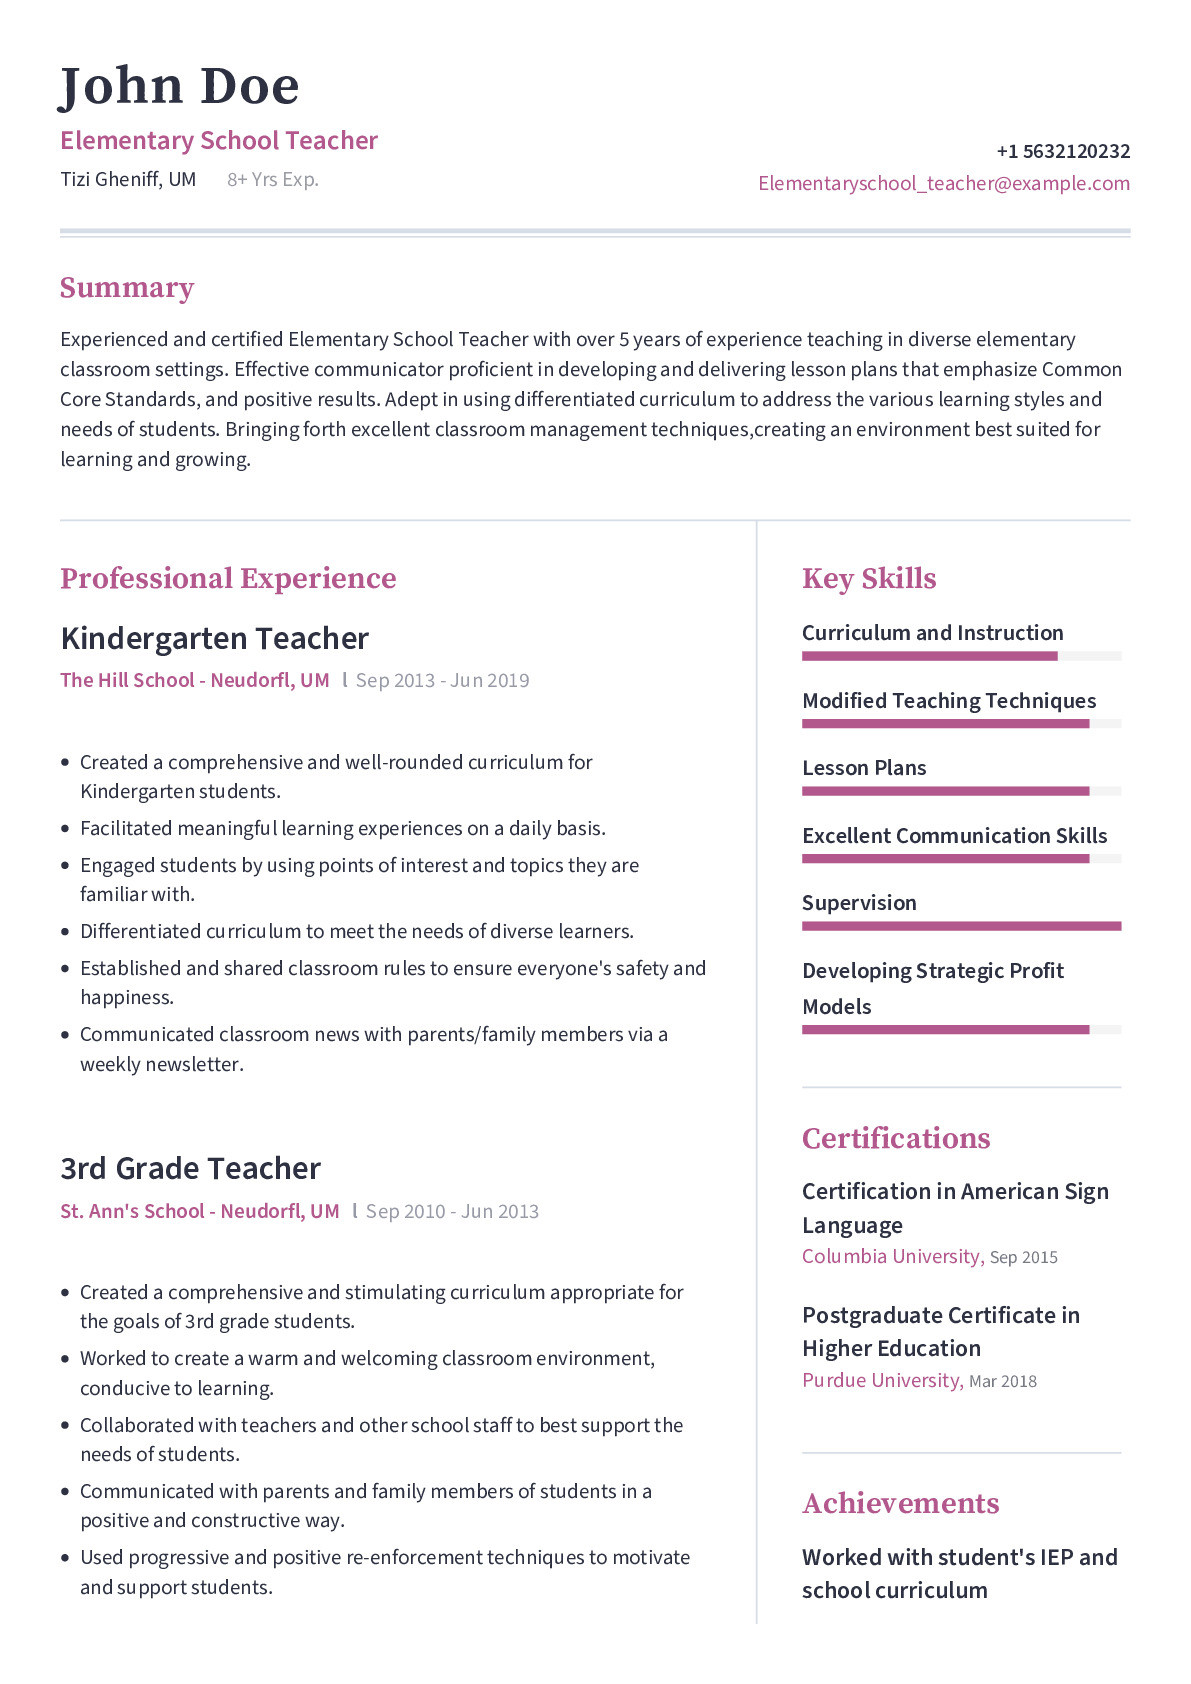 Elementary Special Education Teacher Resume Sample Elementary School Teacher Resume Example with Content Sample …